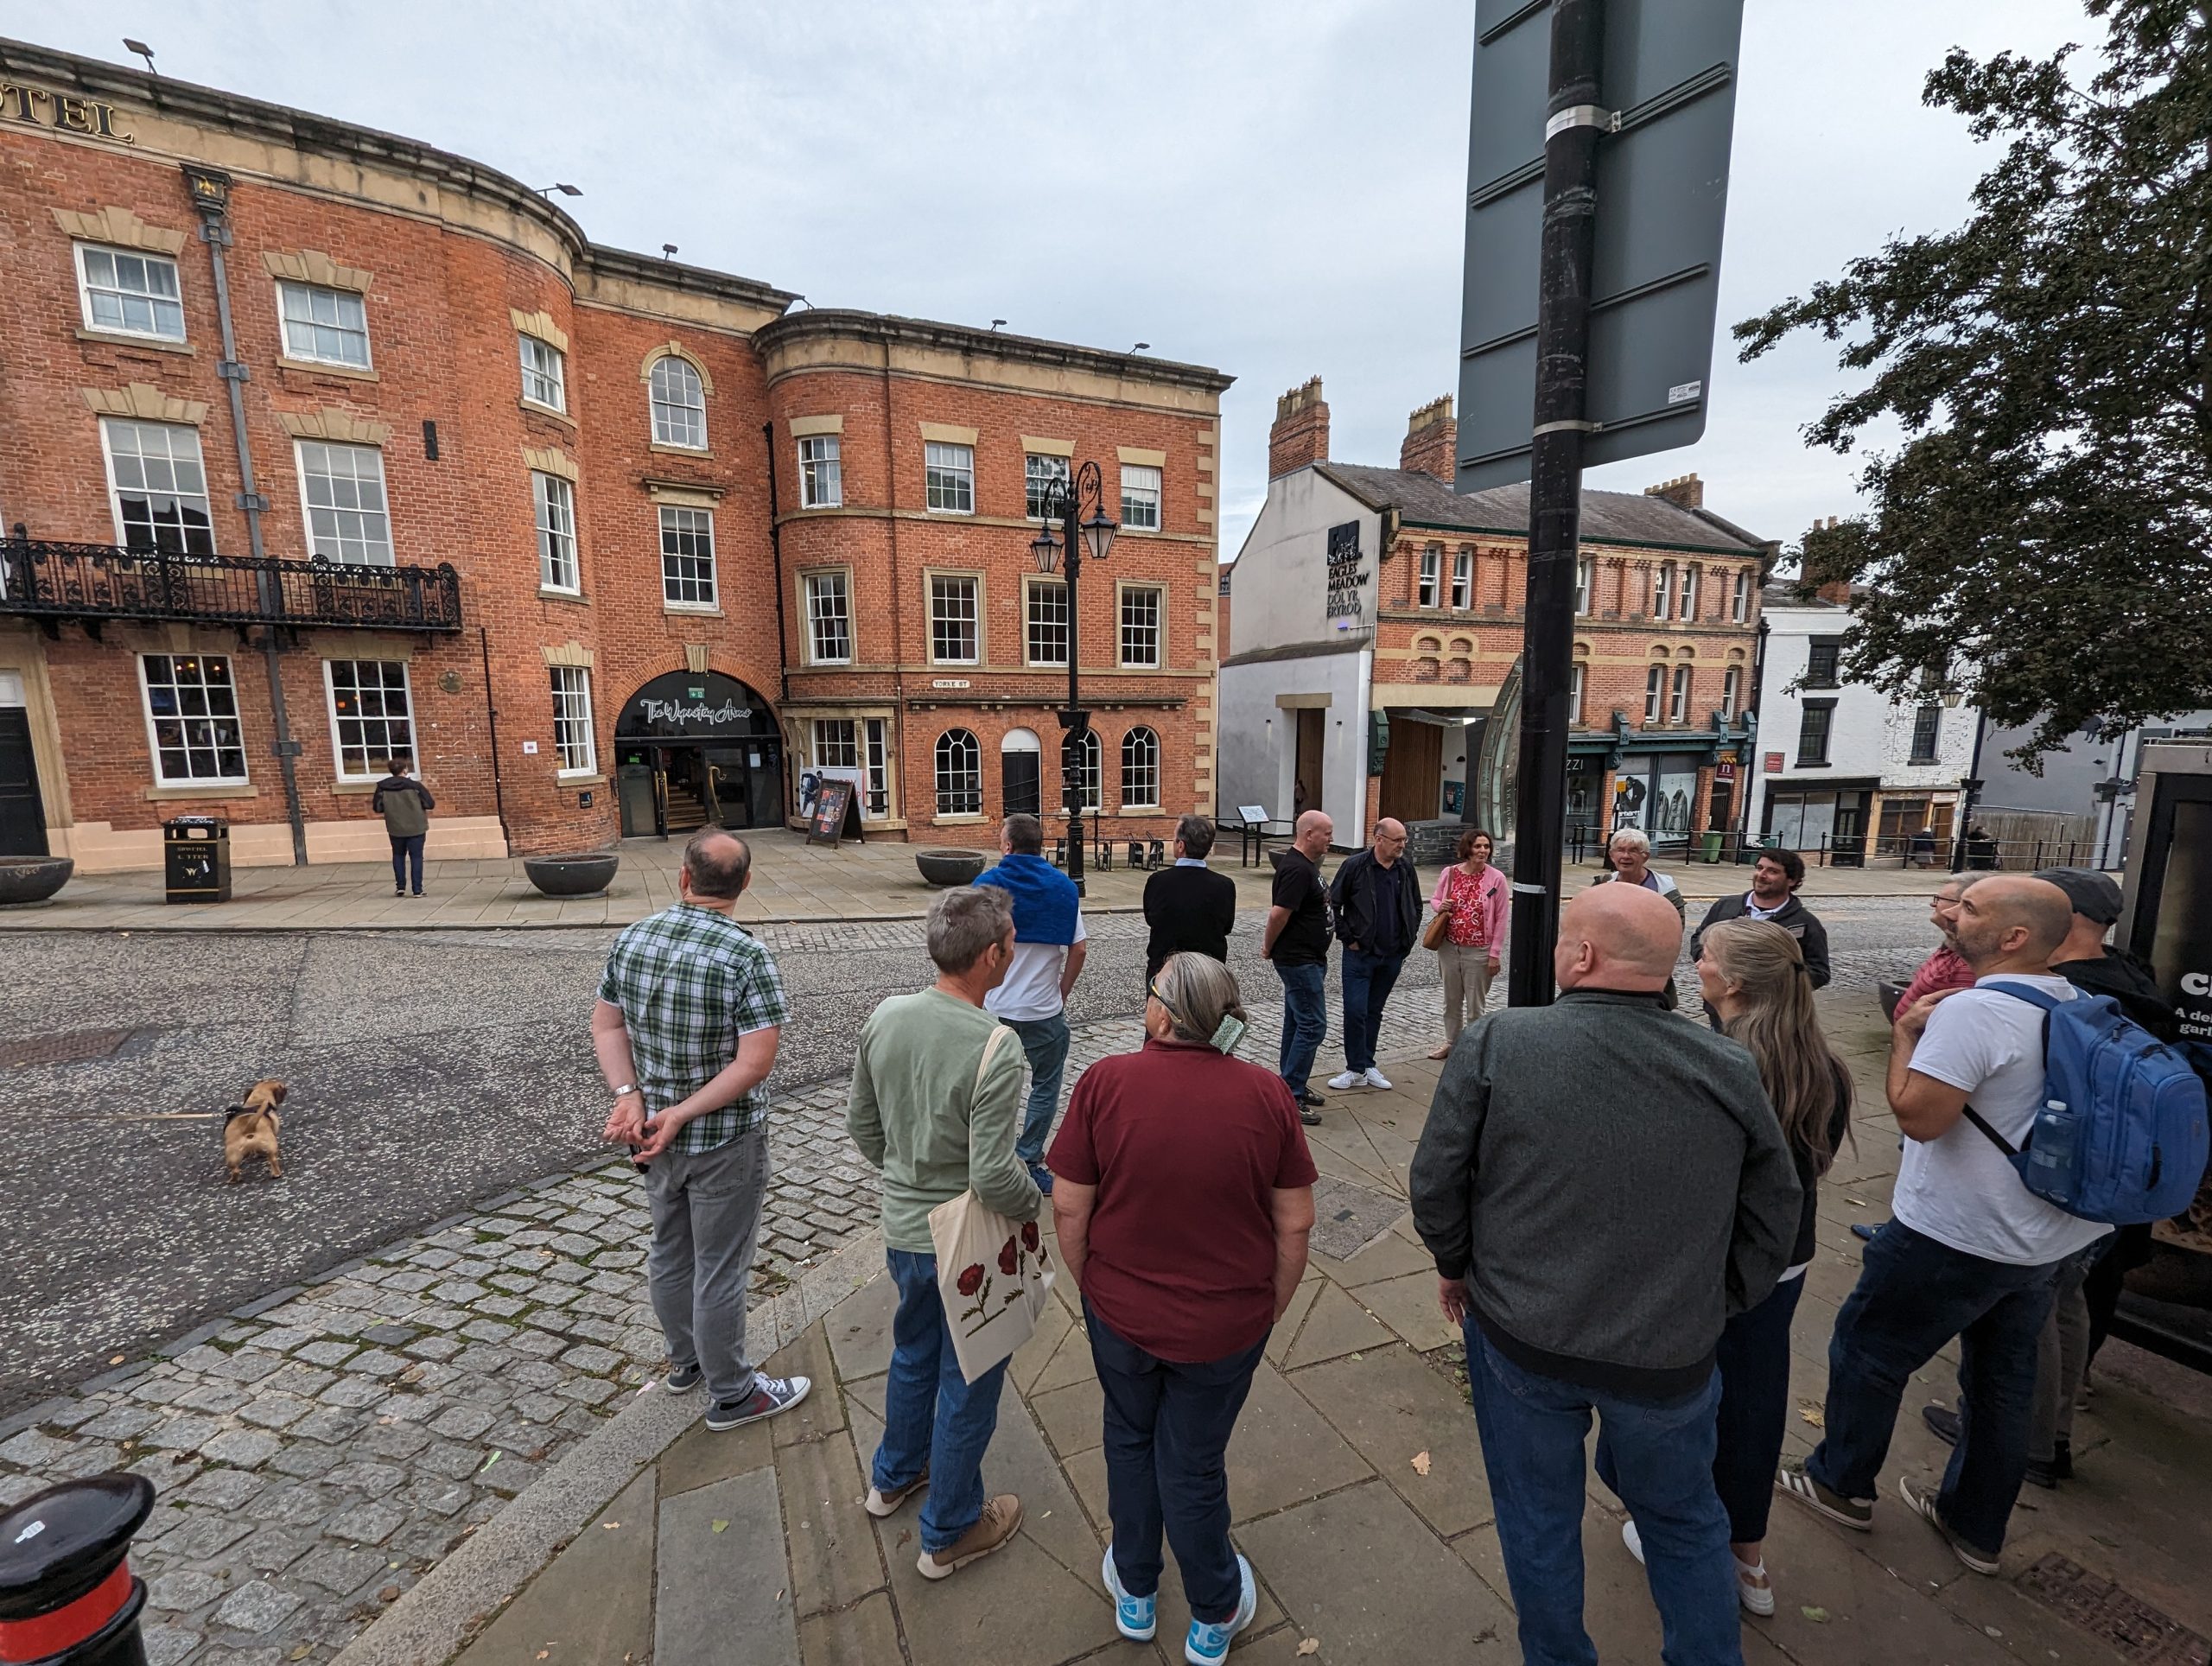 Discover the history of Welsh football in Wrexham - new city centre tours announced